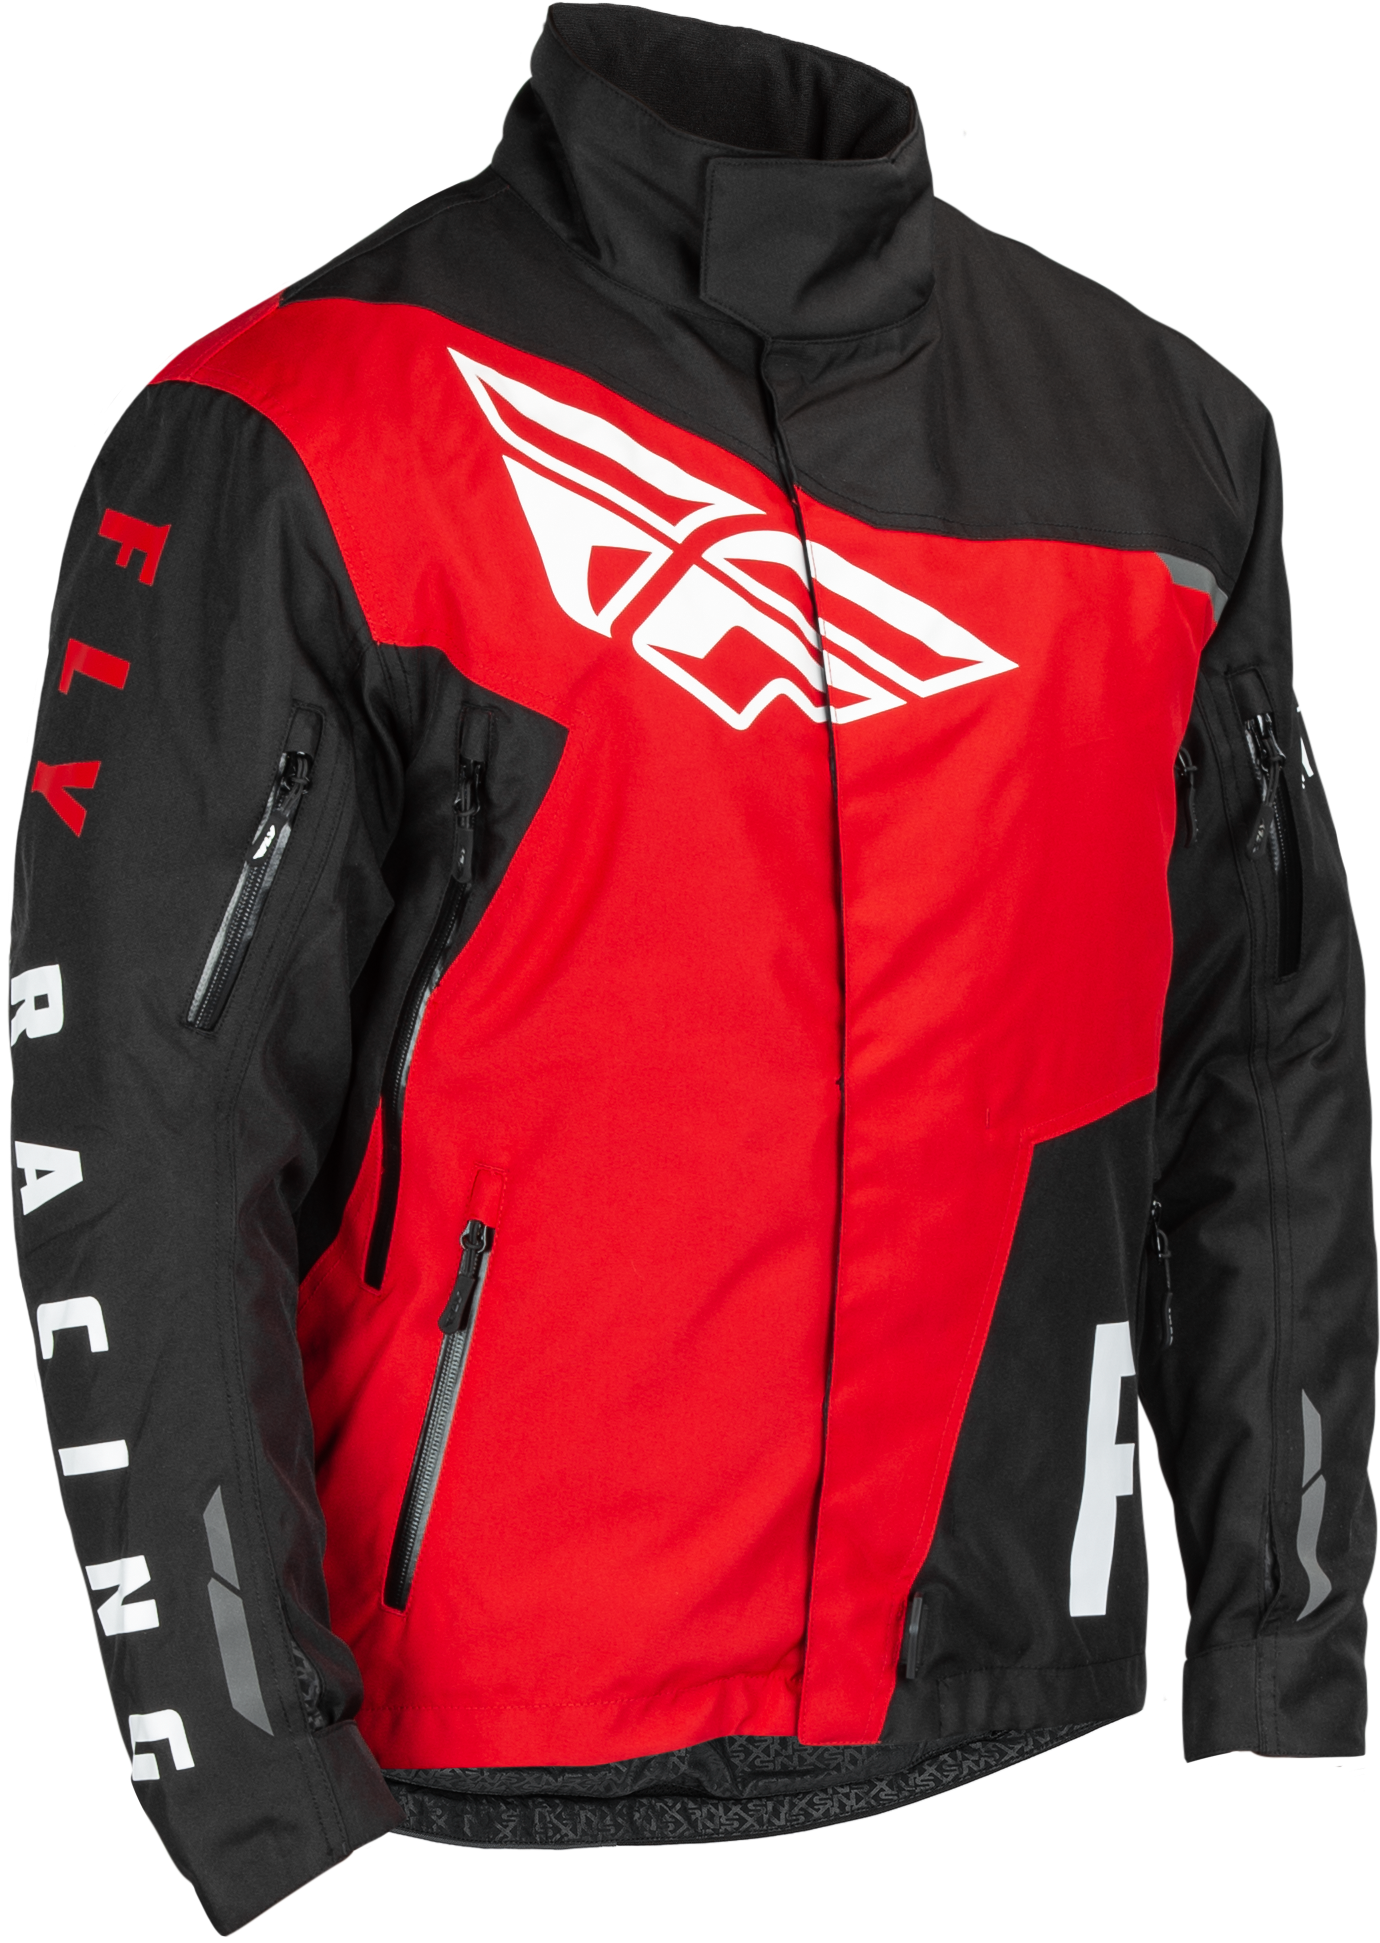 FLY RACING Youth Snx Pro Jacket Black/Red Ym 470-5402YM